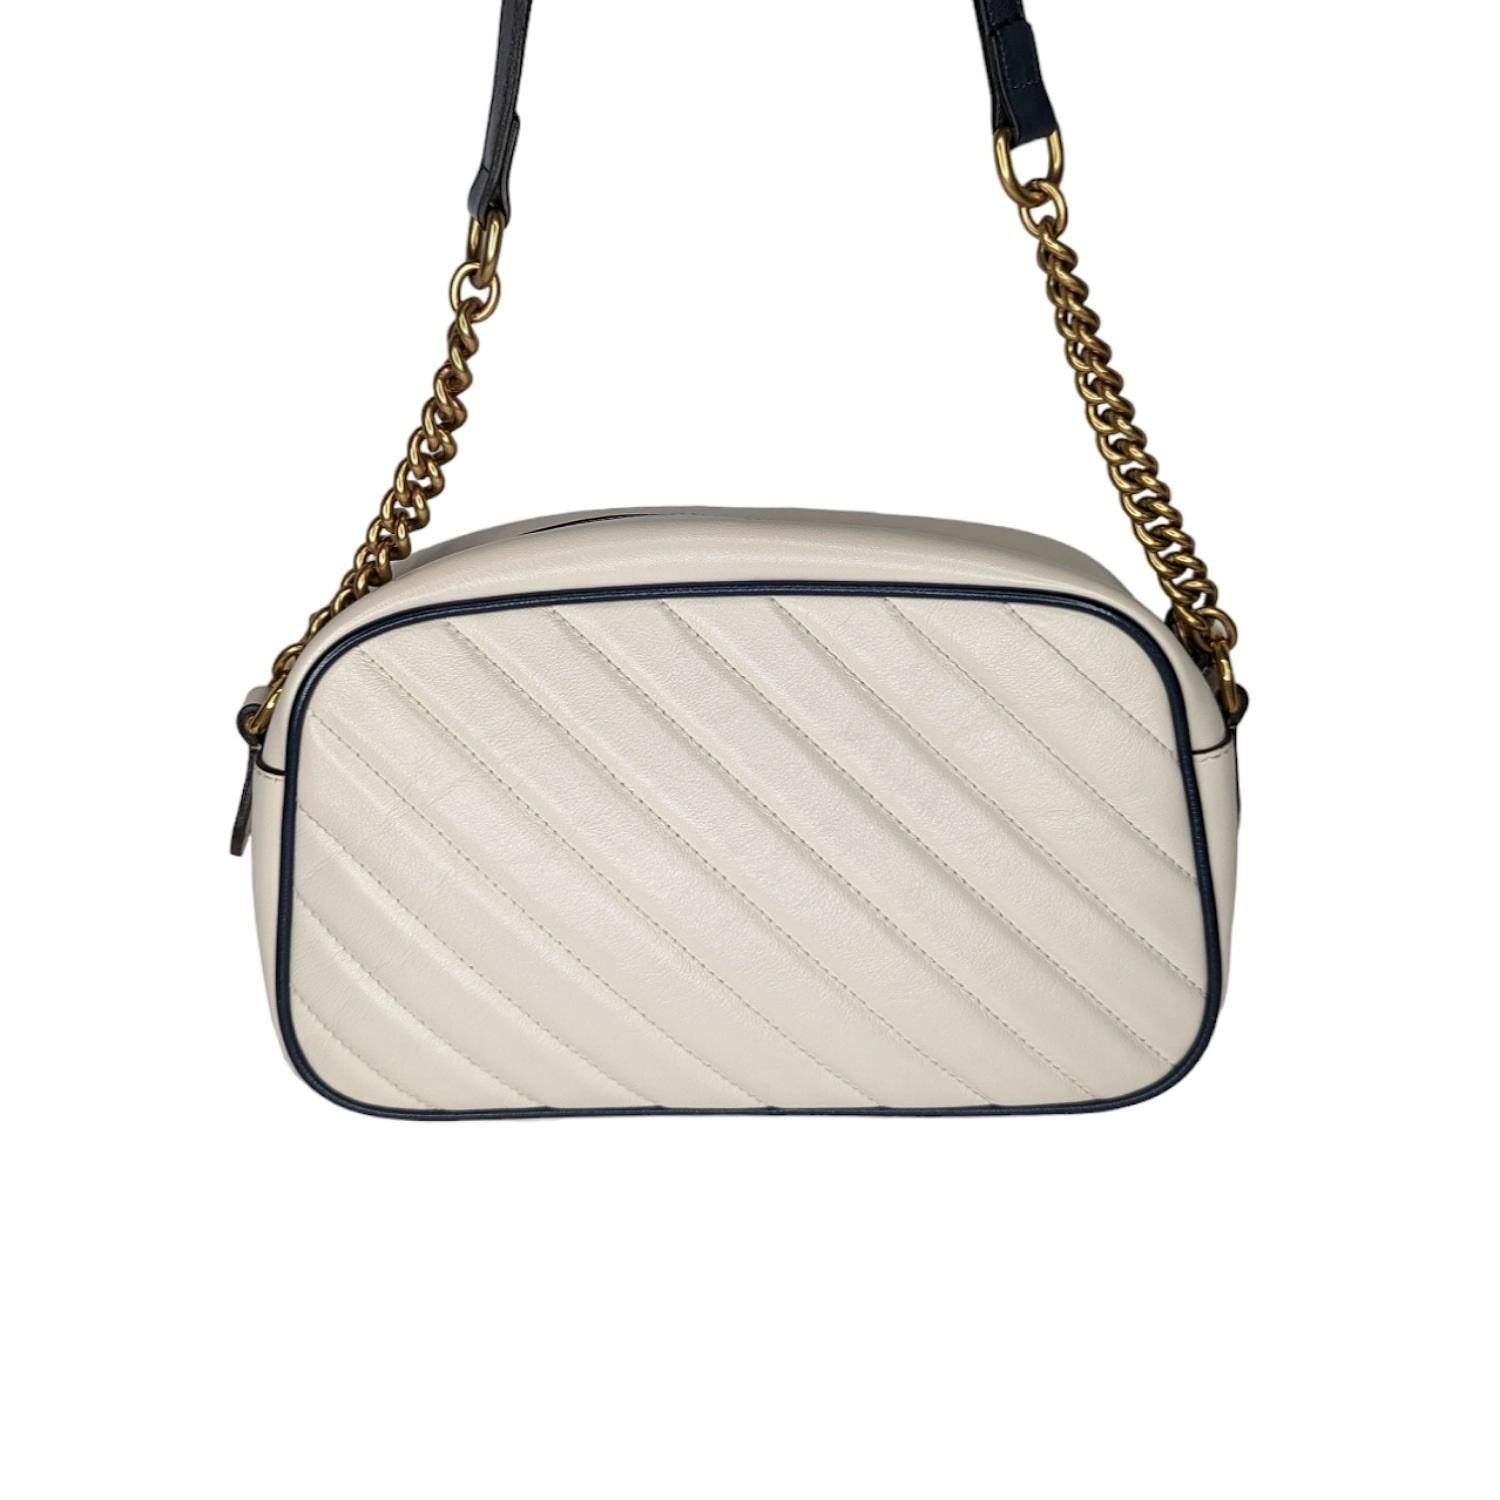 Gucci Vintage Effect Calfskin Matelasse Diagonal Small Torchon GG Marmont Chain Shoulder Bag in White and Blue. This stylish handbag is crafted of soft calfskin leather in off white with a diagonal quilt and navy blue leather accents. This shoulder